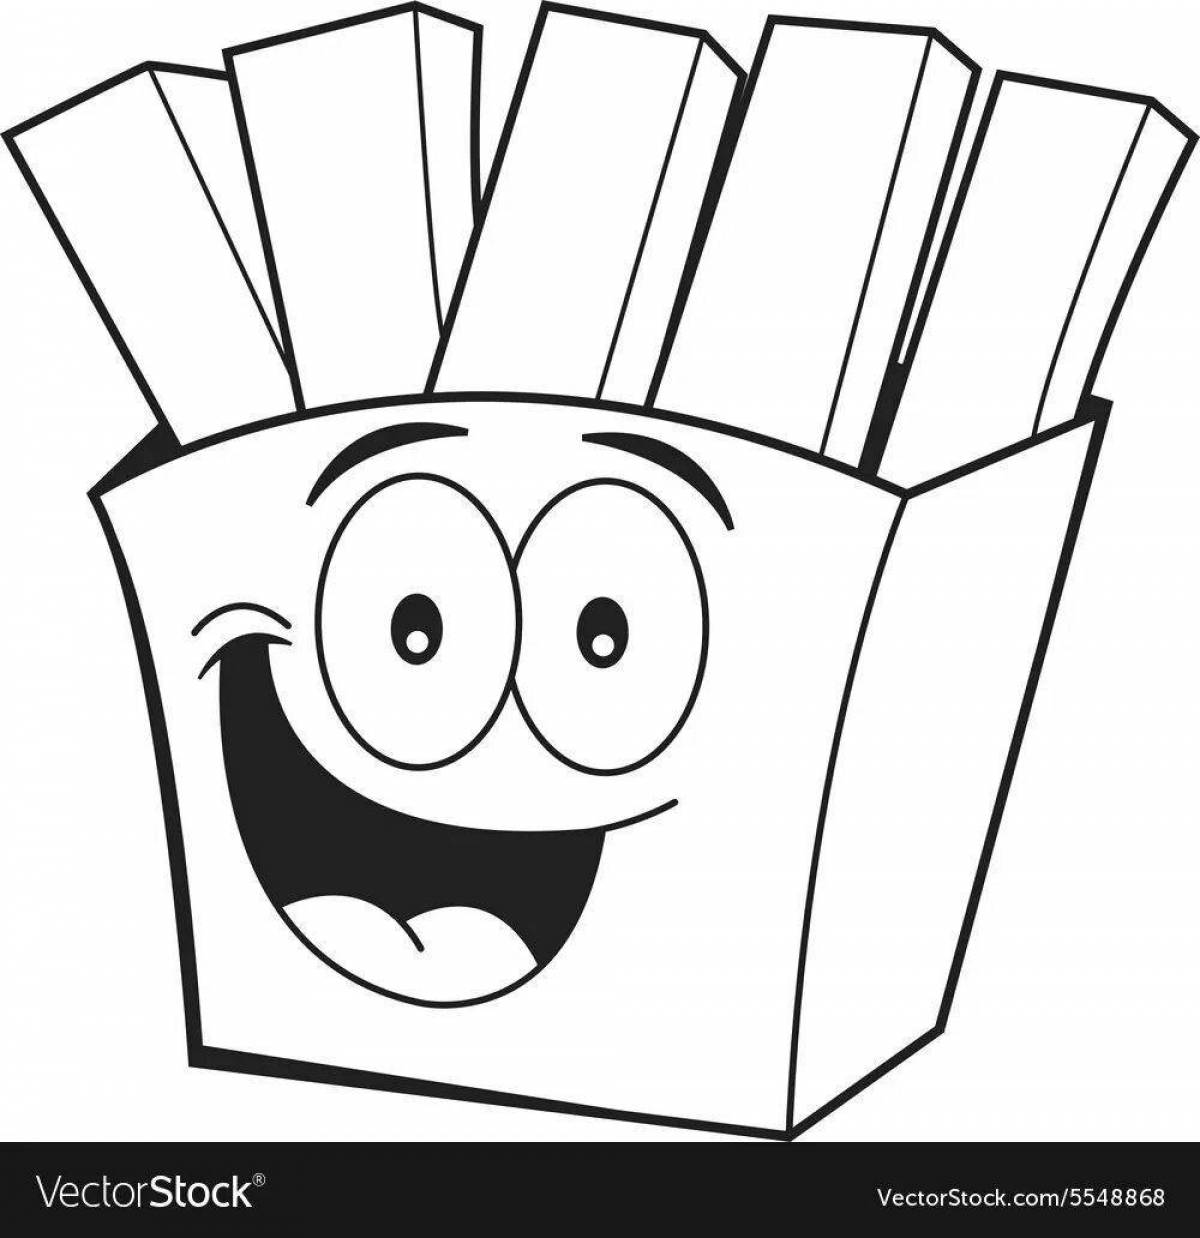 Colorful french fries coloring page for kids